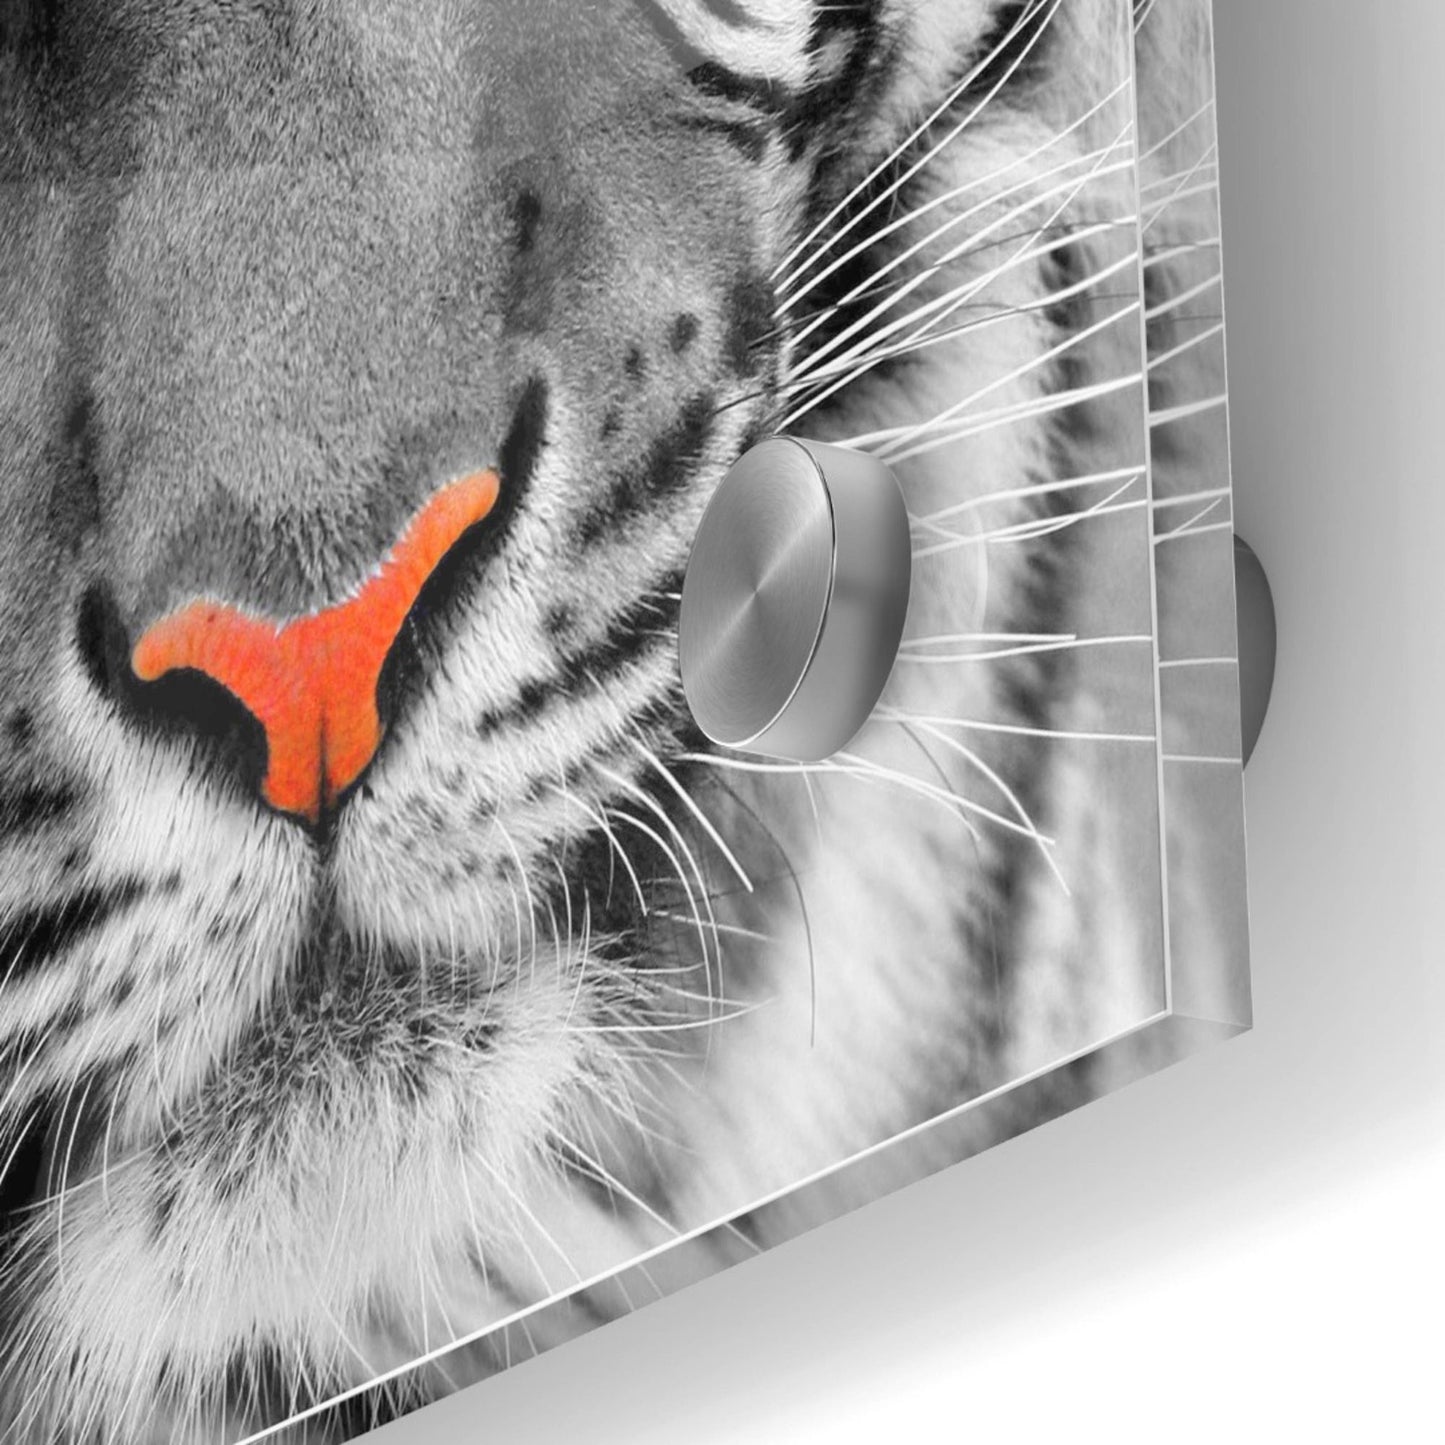 Epic Art 'Thrill of the Tiger' Acrylic Glass Wall Art,36x36